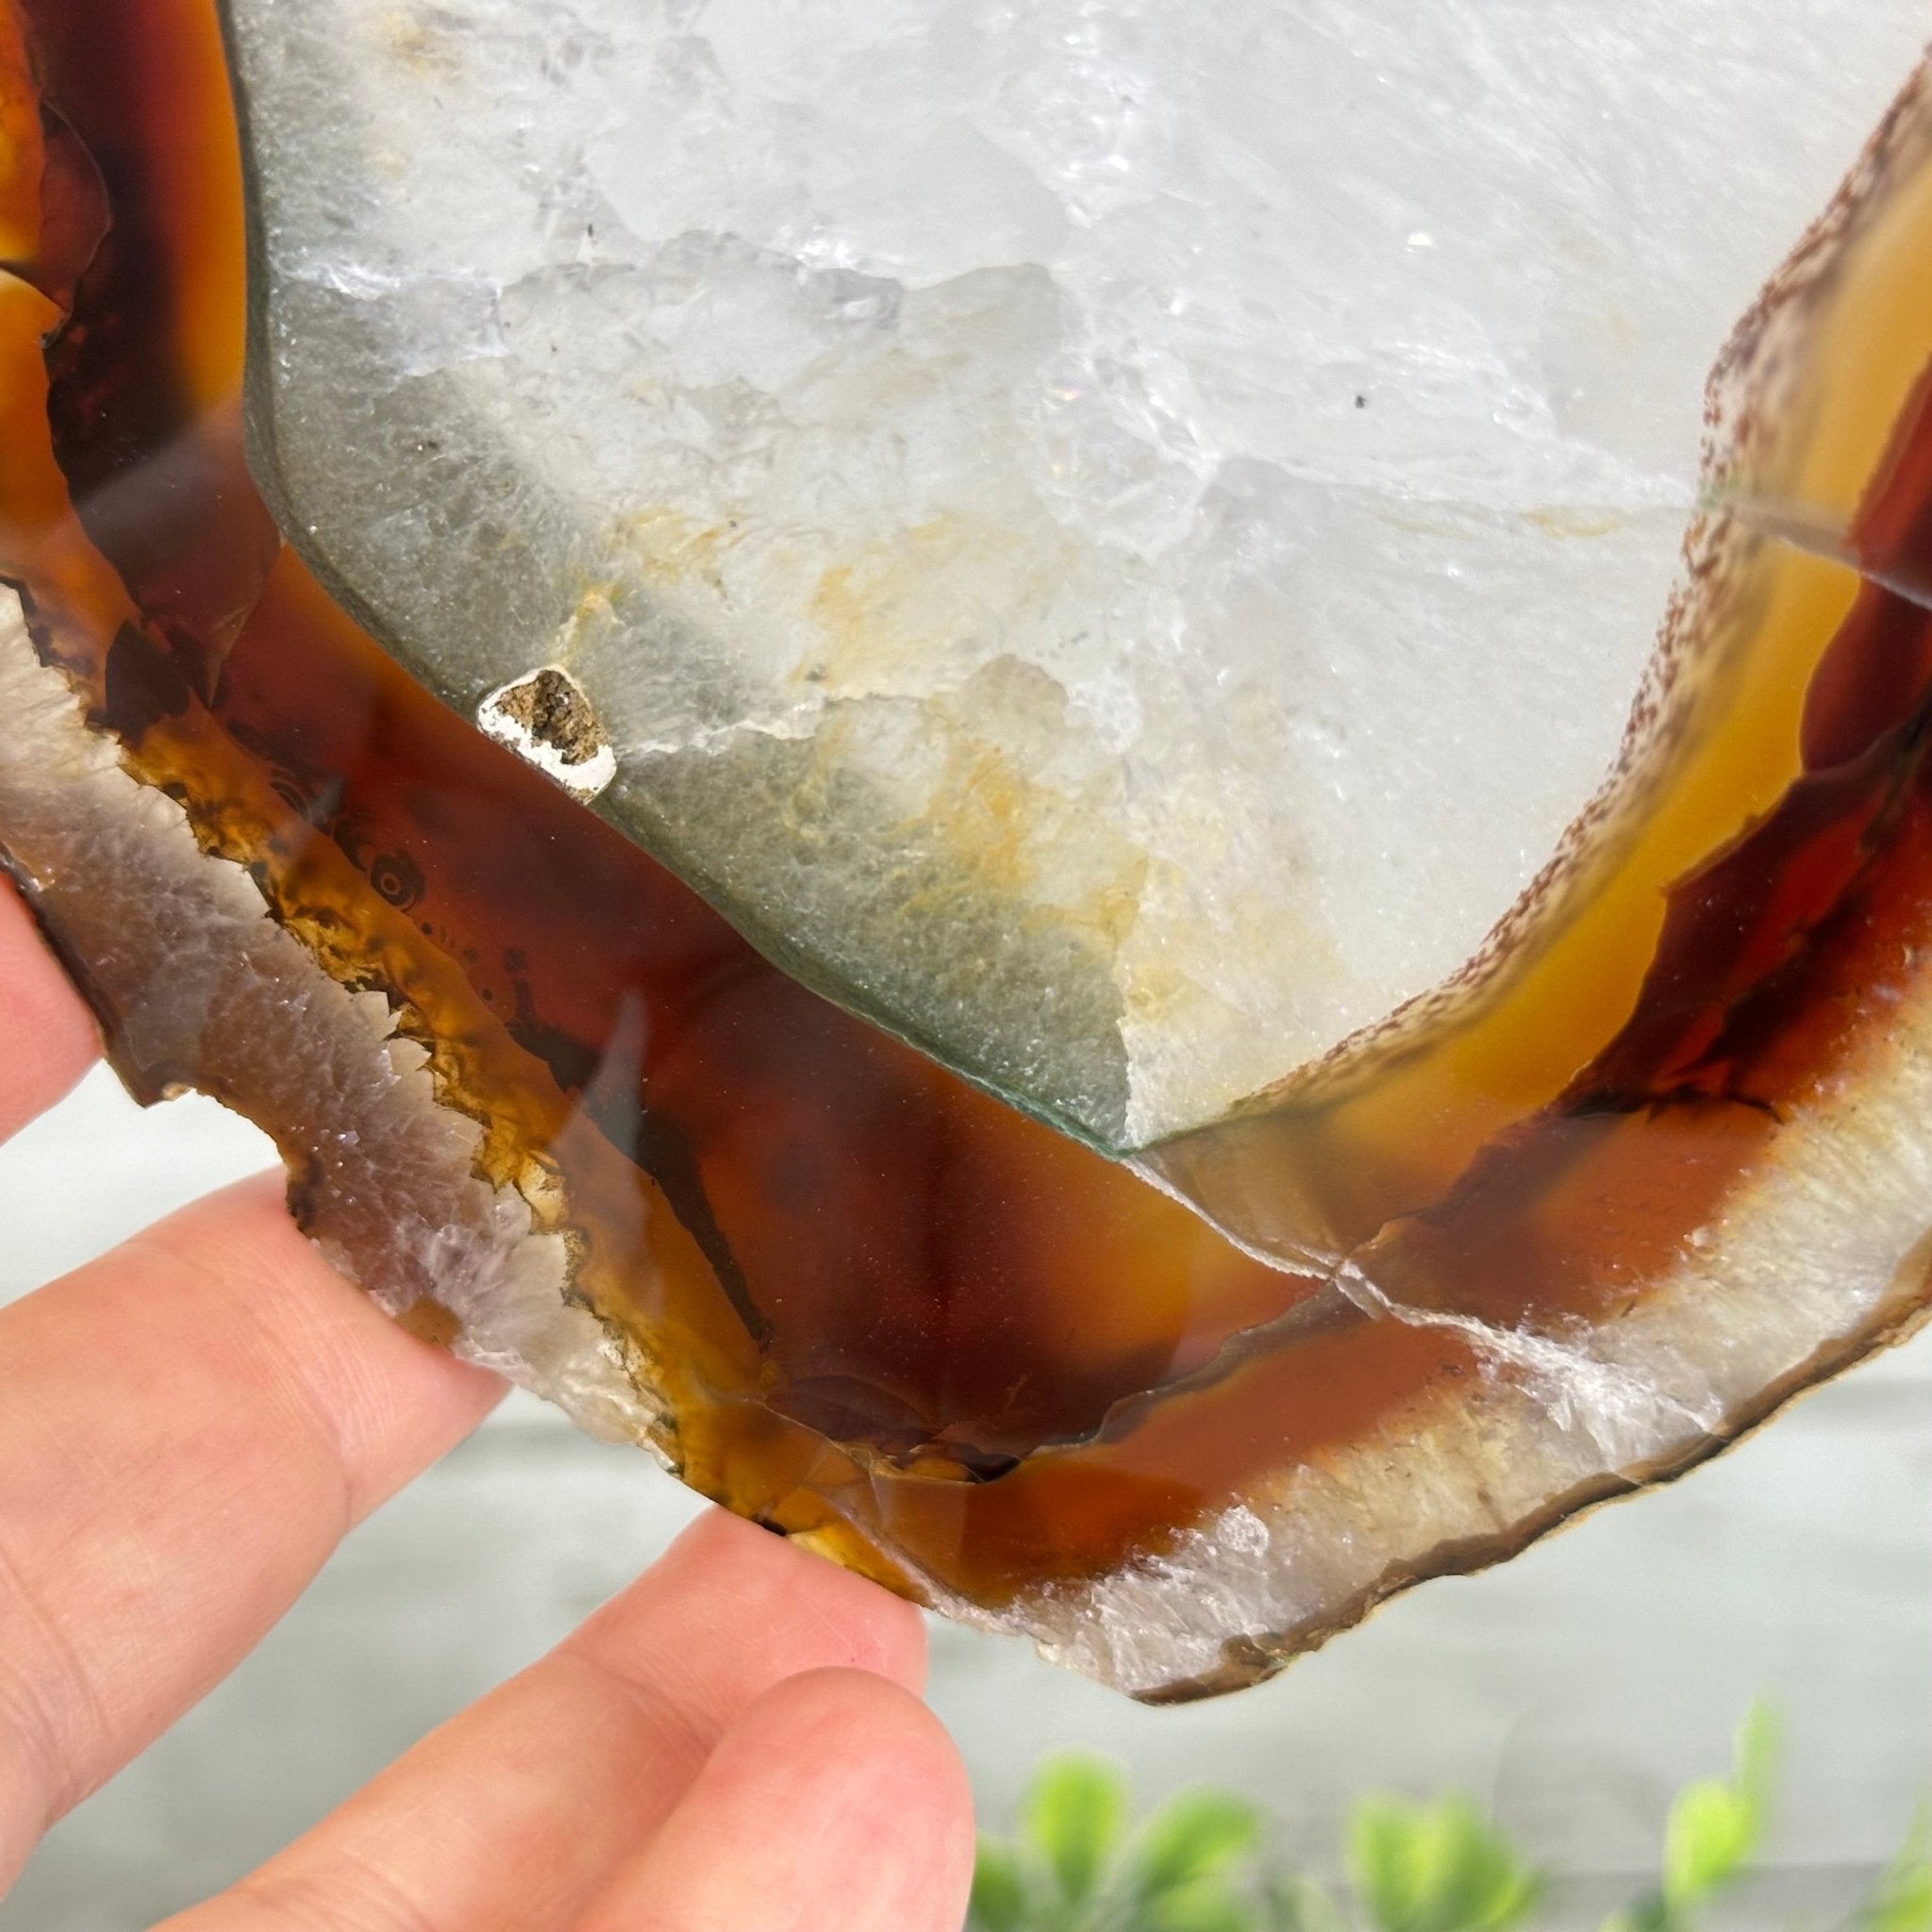 Natural Brazilian Agate "Butterfly Wings", 15" Tall #5050NA-098 - Brazil GemsBrazil GemsNatural Brazilian Agate "Butterfly Wings", 15" Tall #5050NA-098Agate Butterfly Wings5050NA-098